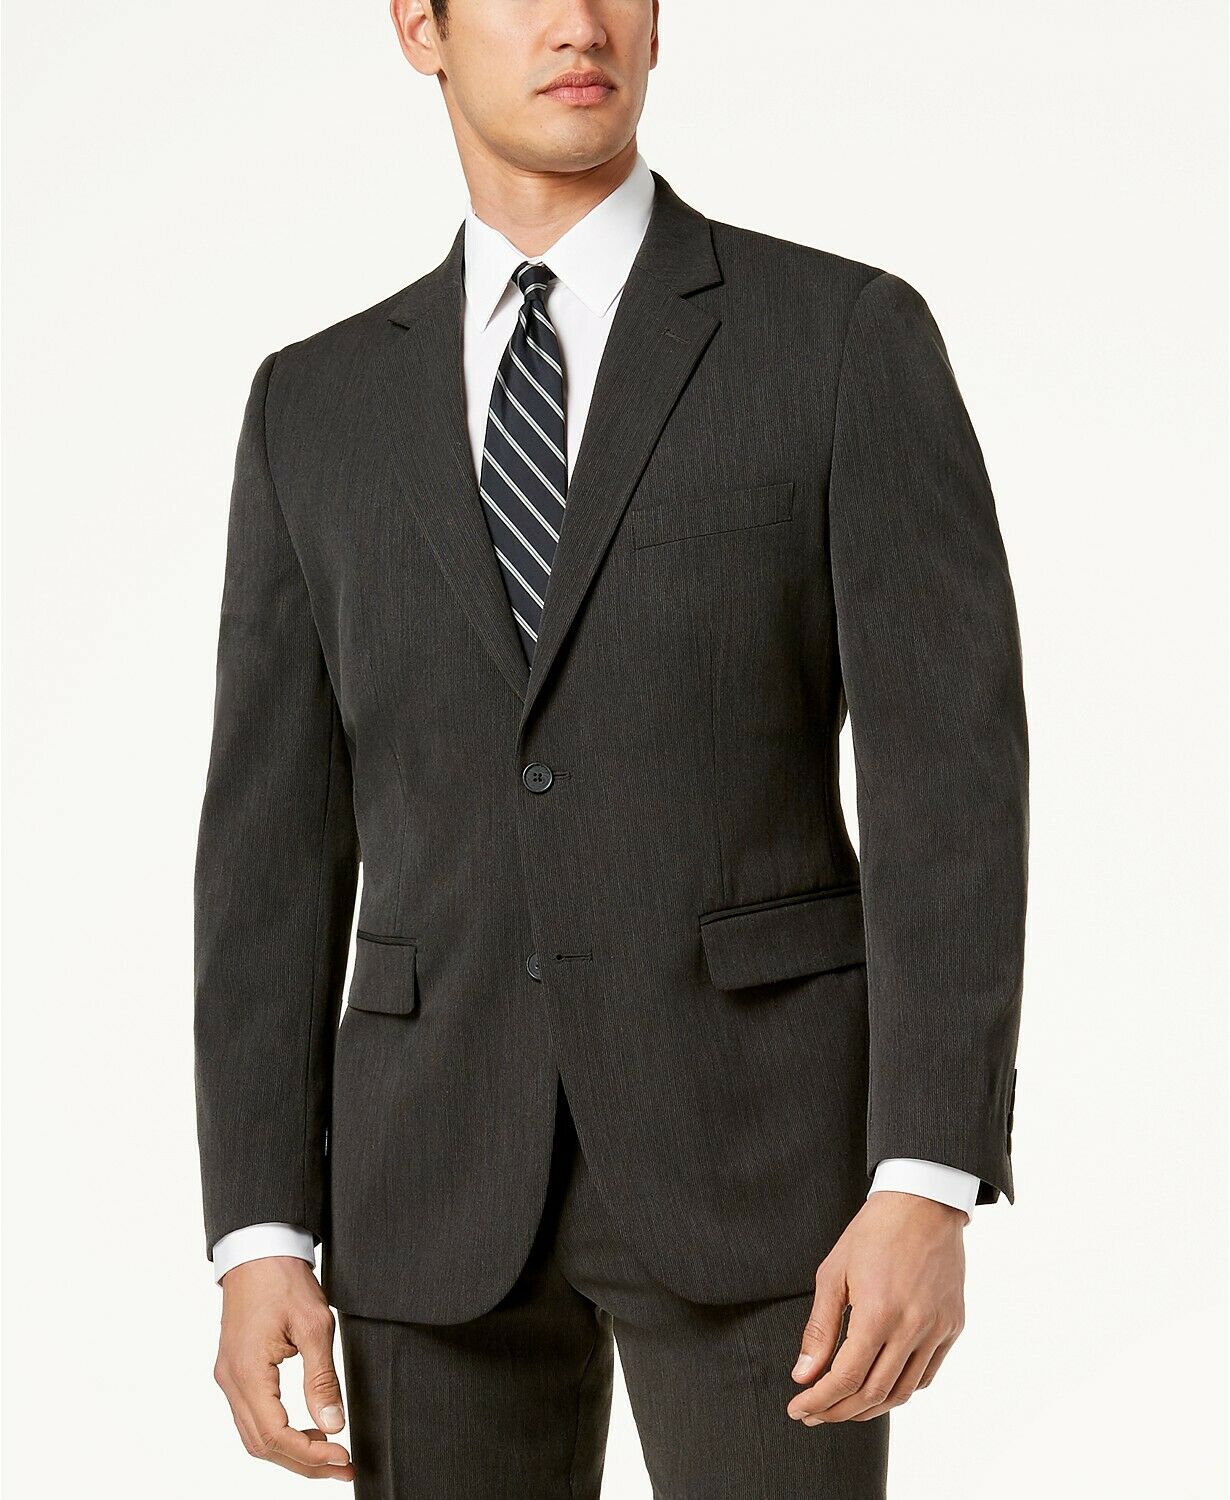 Nautica Men's Modern-Fit Active Stretch Suit JACKET ONLY 40S Charcoal Grey